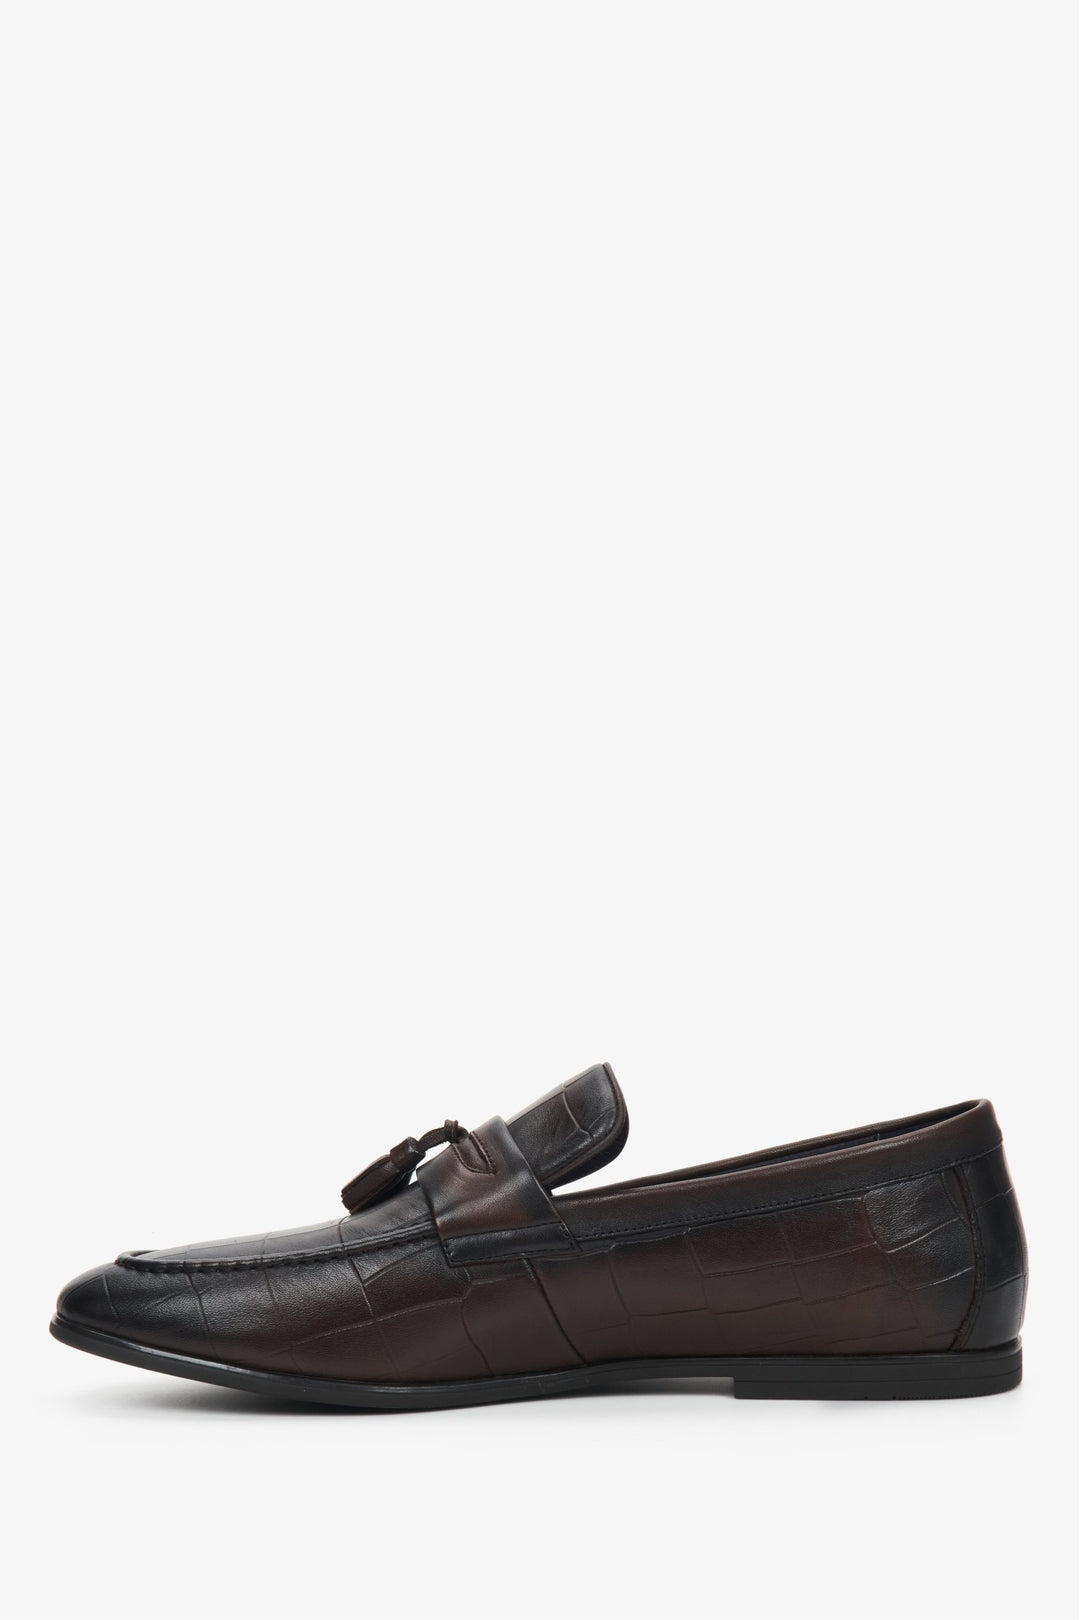 Men's leather loafers with embellishments for fall - shoe profile.